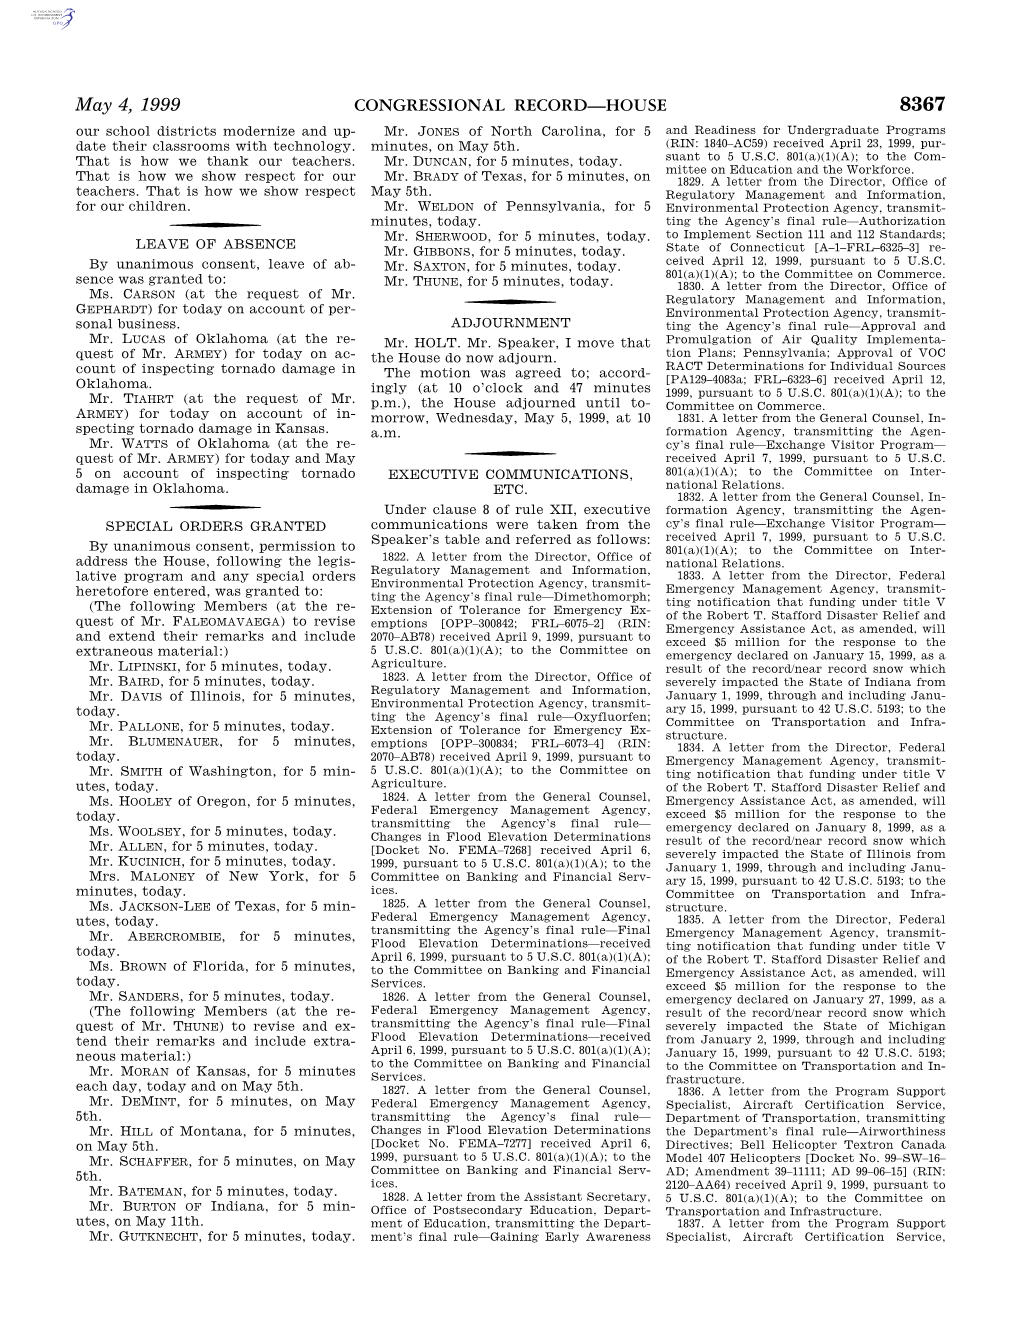 CONGRESSIONAL RECORD—HOUSE May 4, 1999